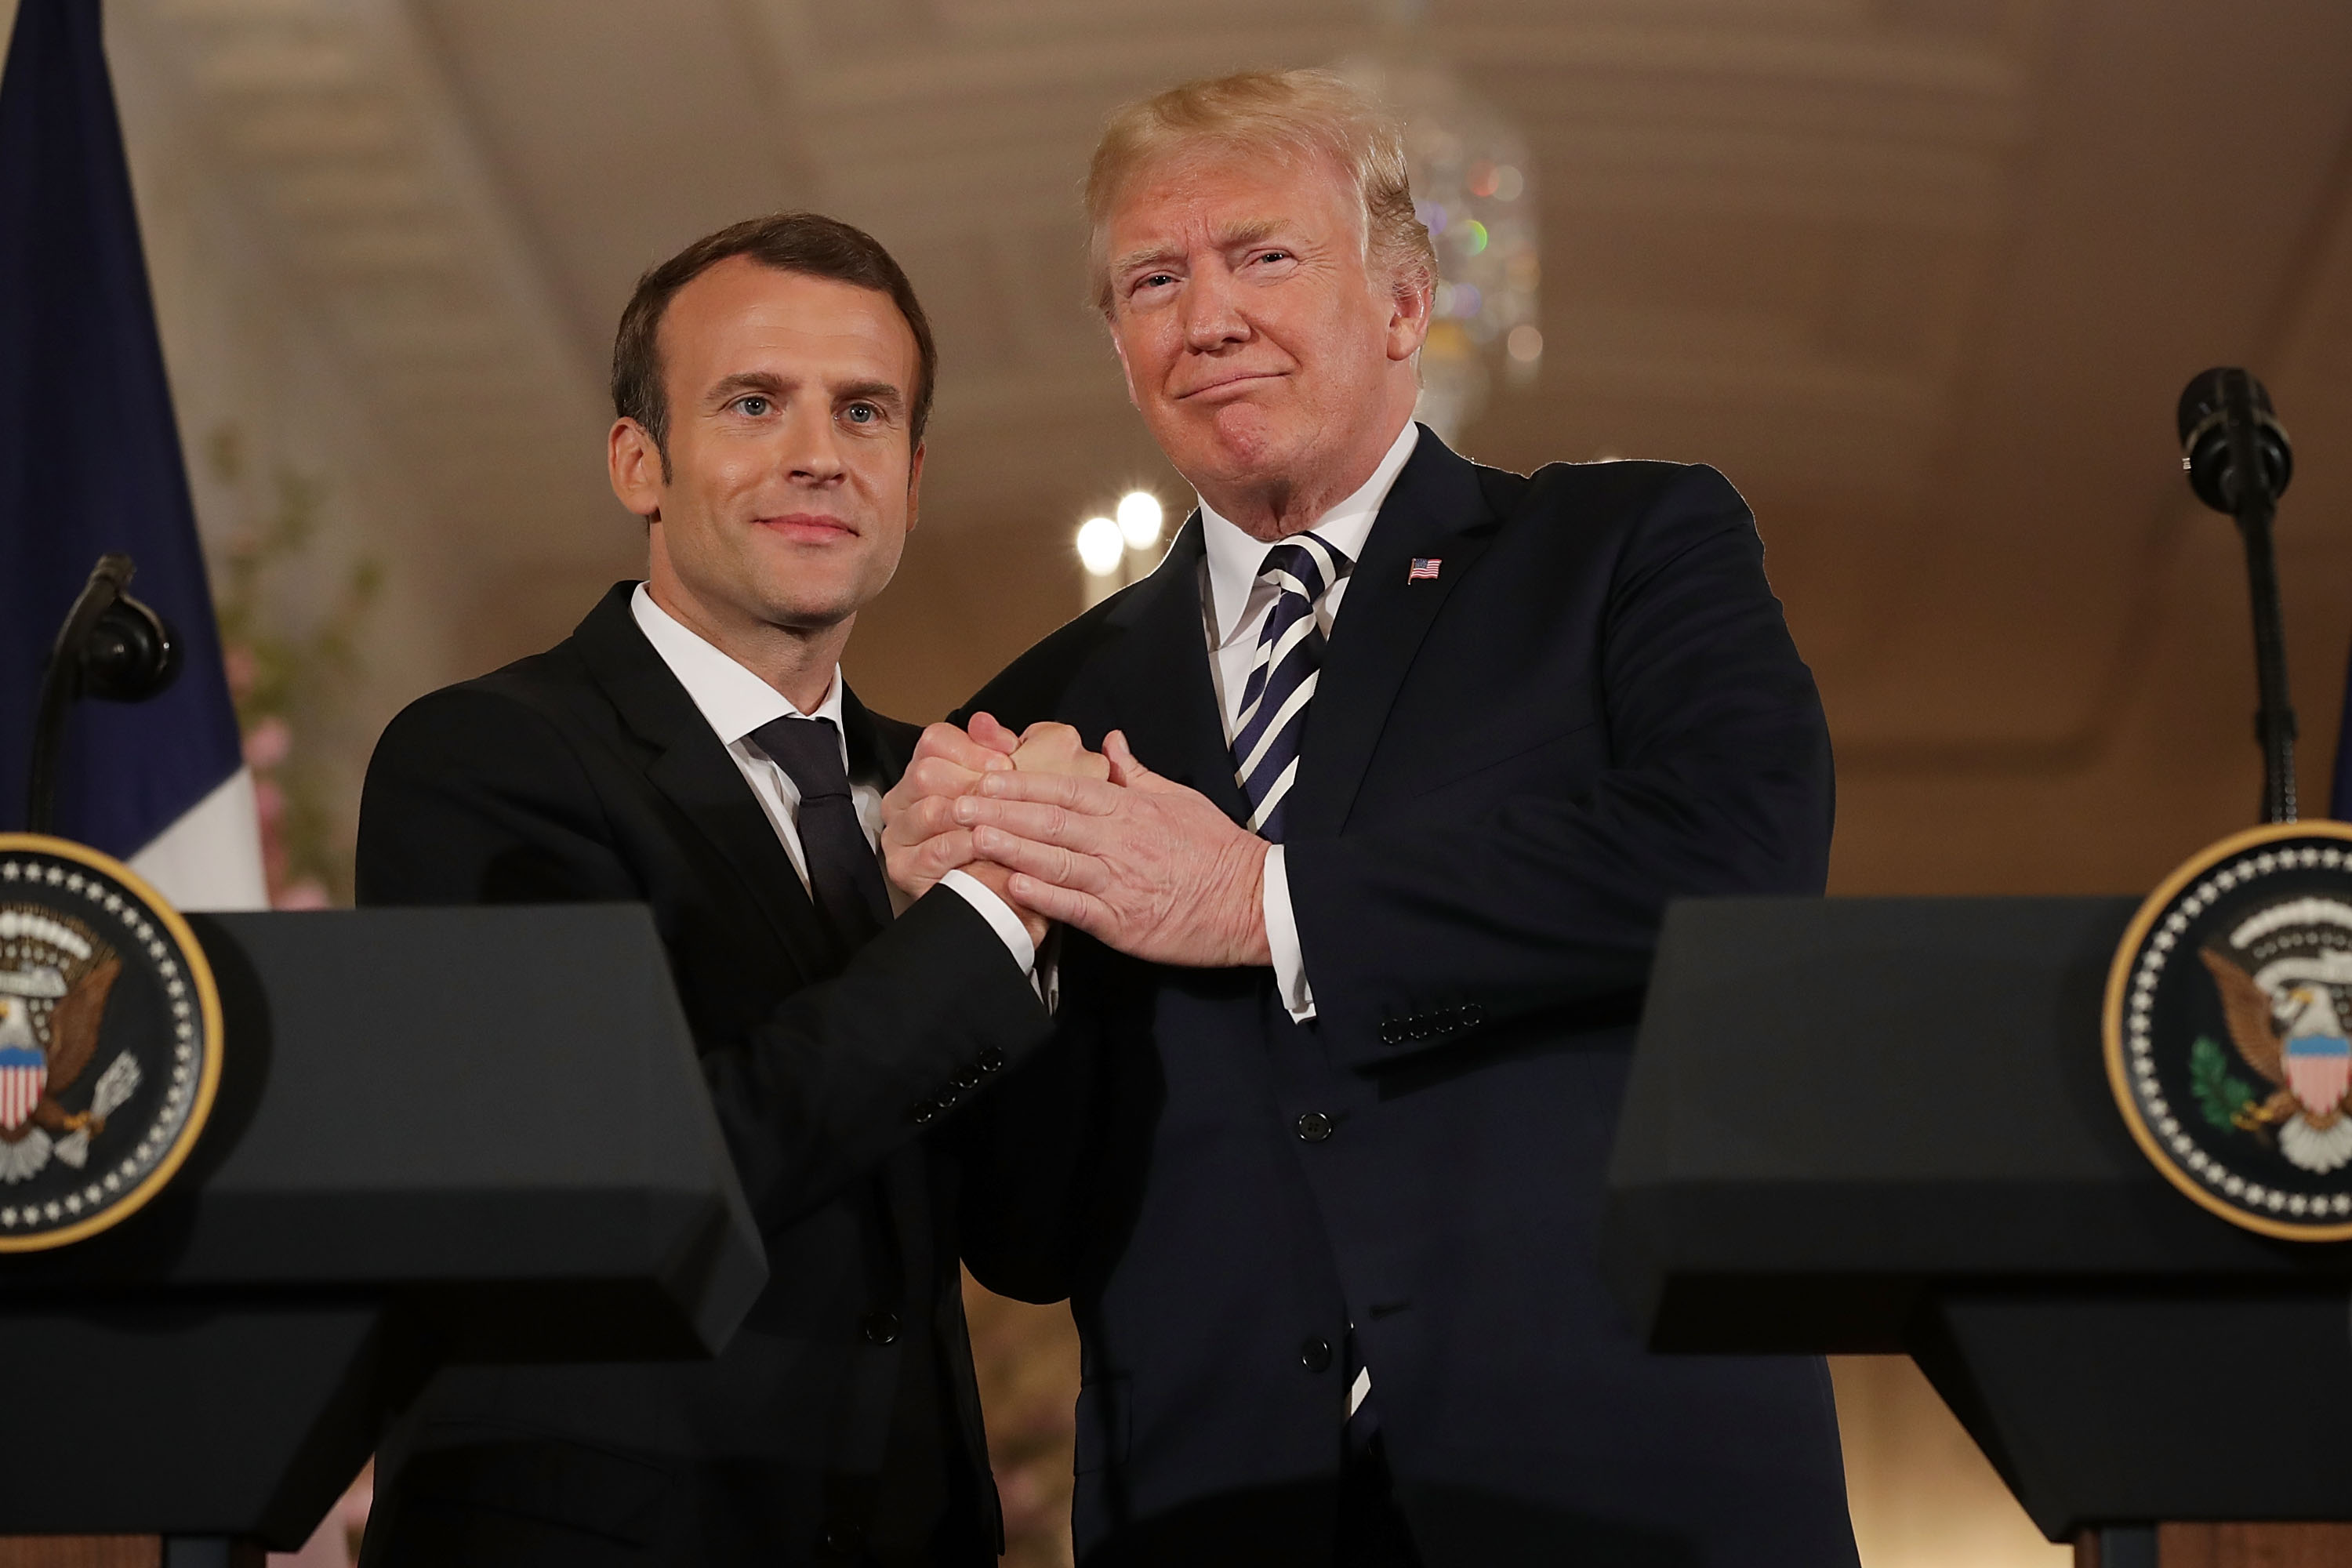 WASHINGTON, DC - APRIL 24: French President Emmanuel Macron (L) and U.S. President Donald Trump shake hands at the completion of a joint press conference in the East Room of the White House April 24, 2018 in Washington, DC. Macron and Trump met throughout the day to discuss a range of bilateral issues as Trump holds his first official state visit with the French president. (Photo by Chip Somodevilla/Getty Images)